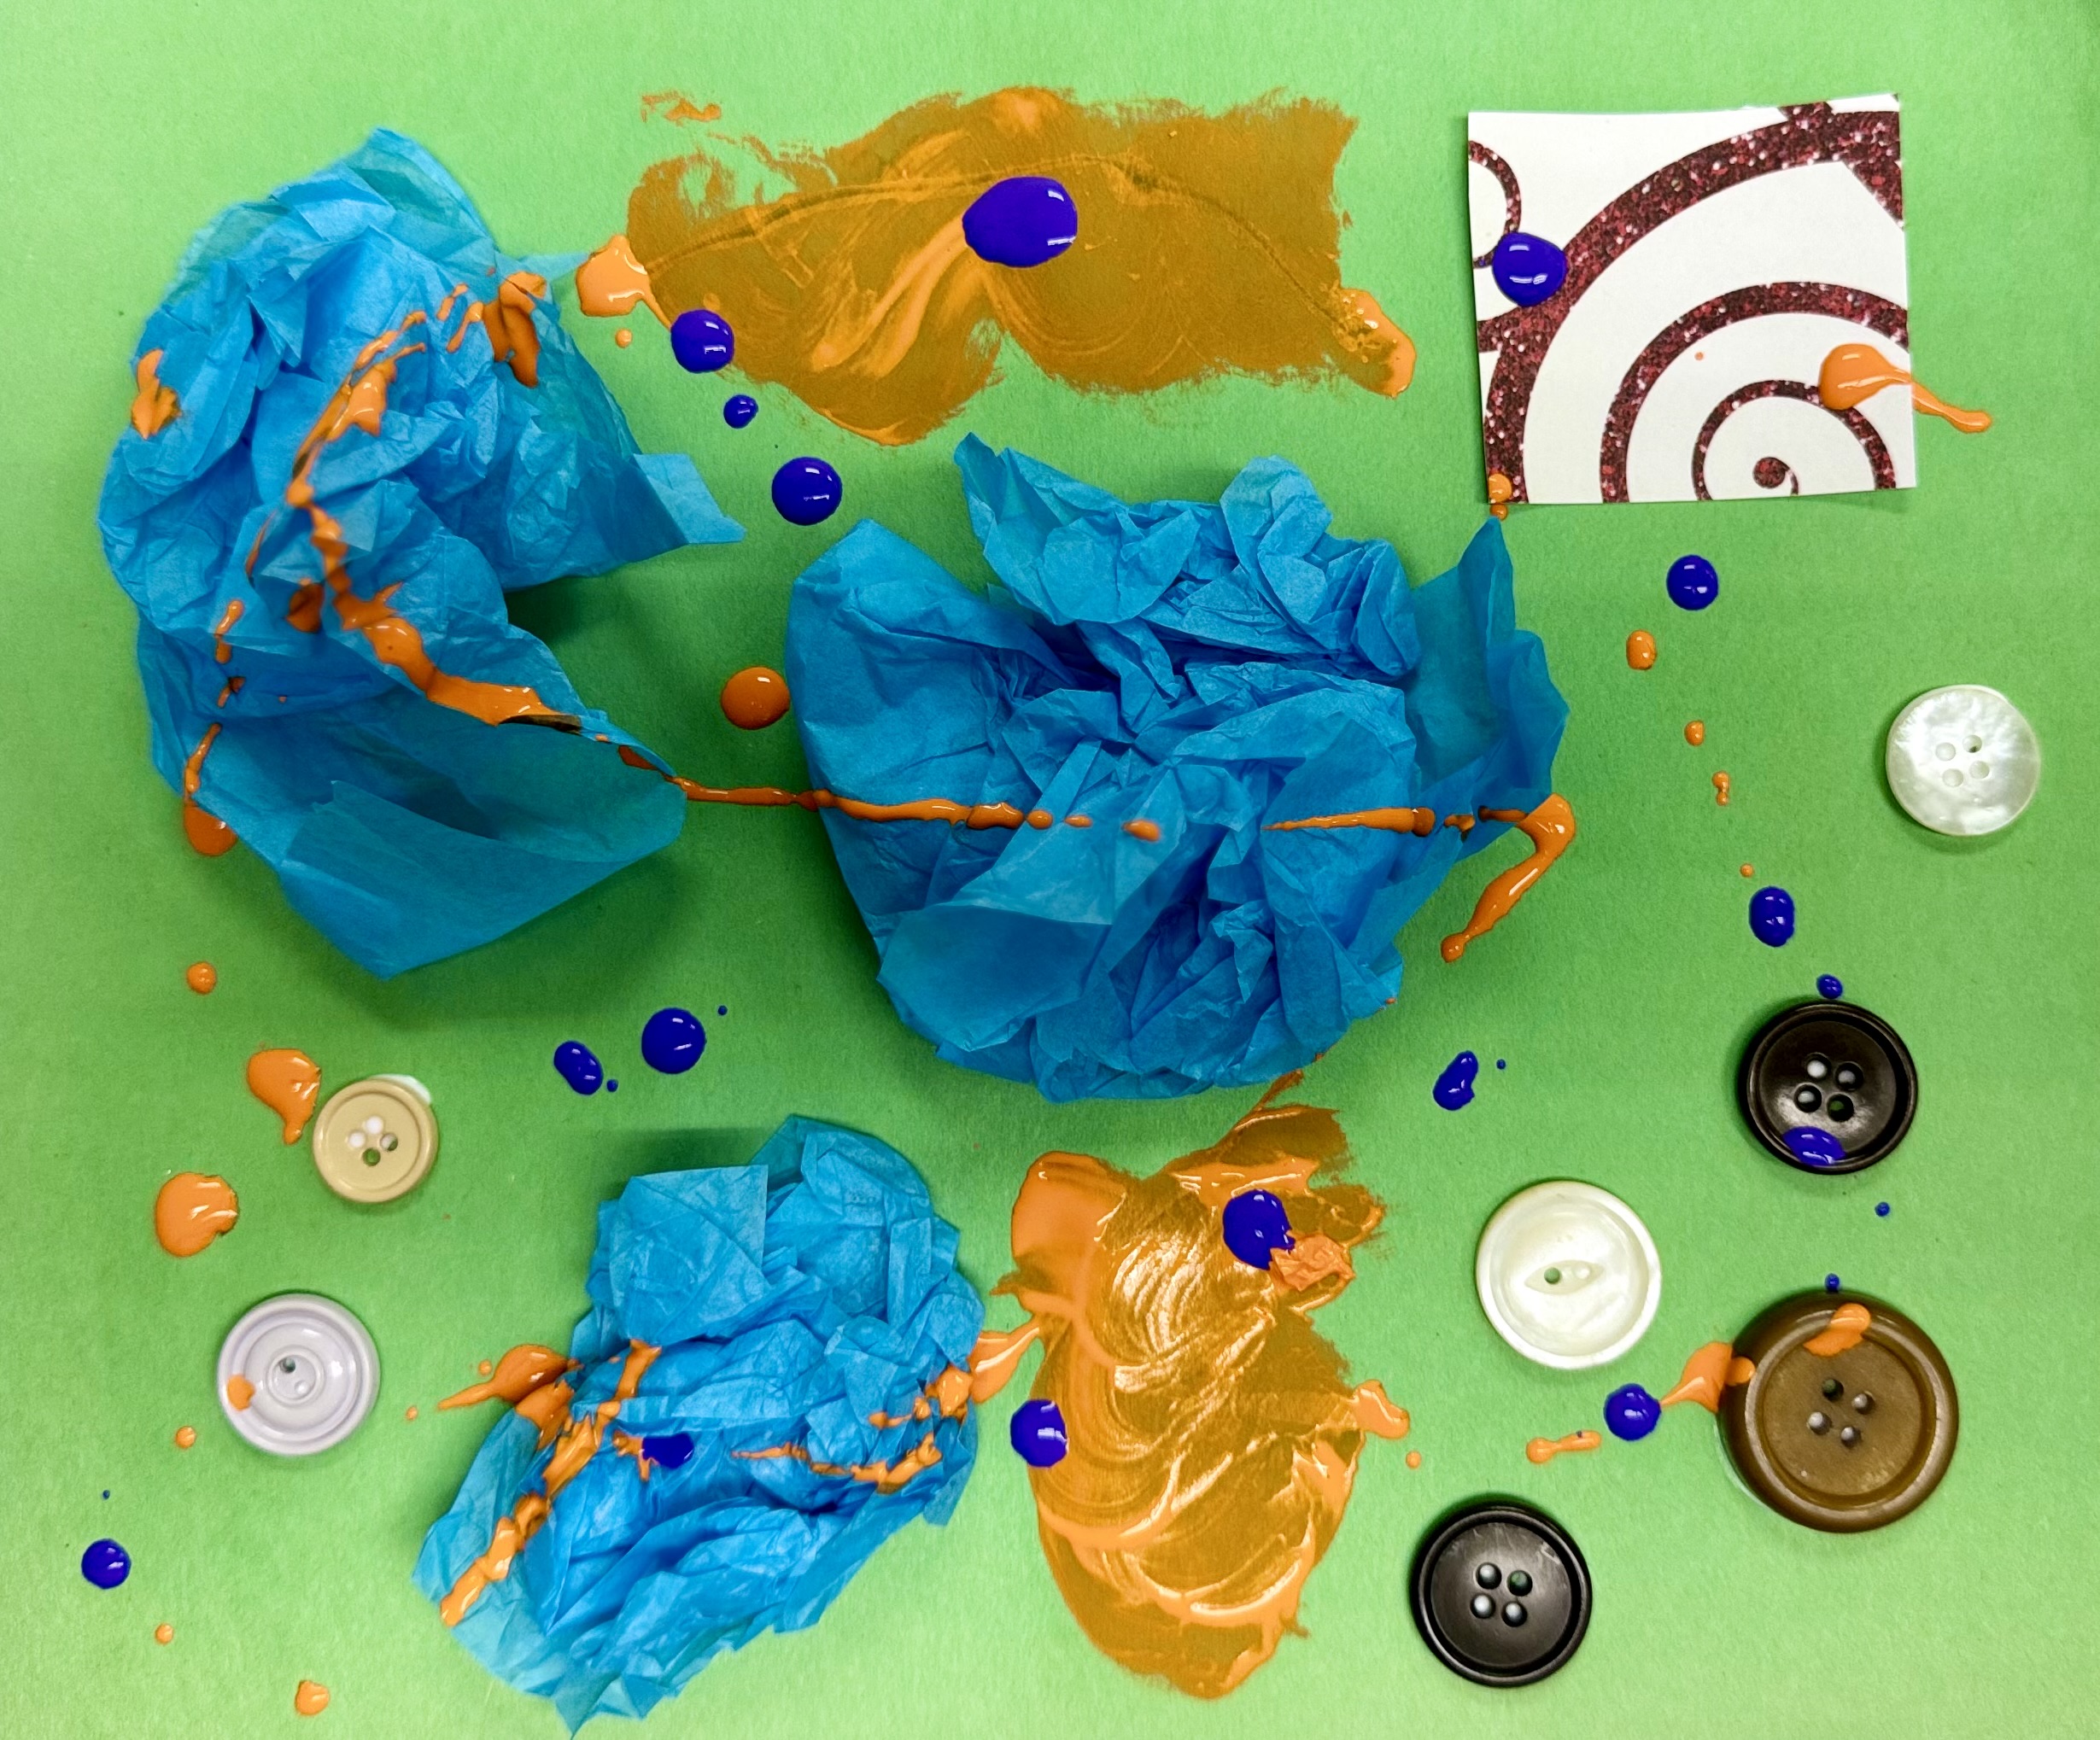 Green paper decorated with blue tissue paper, buttons, and purple and orange paint